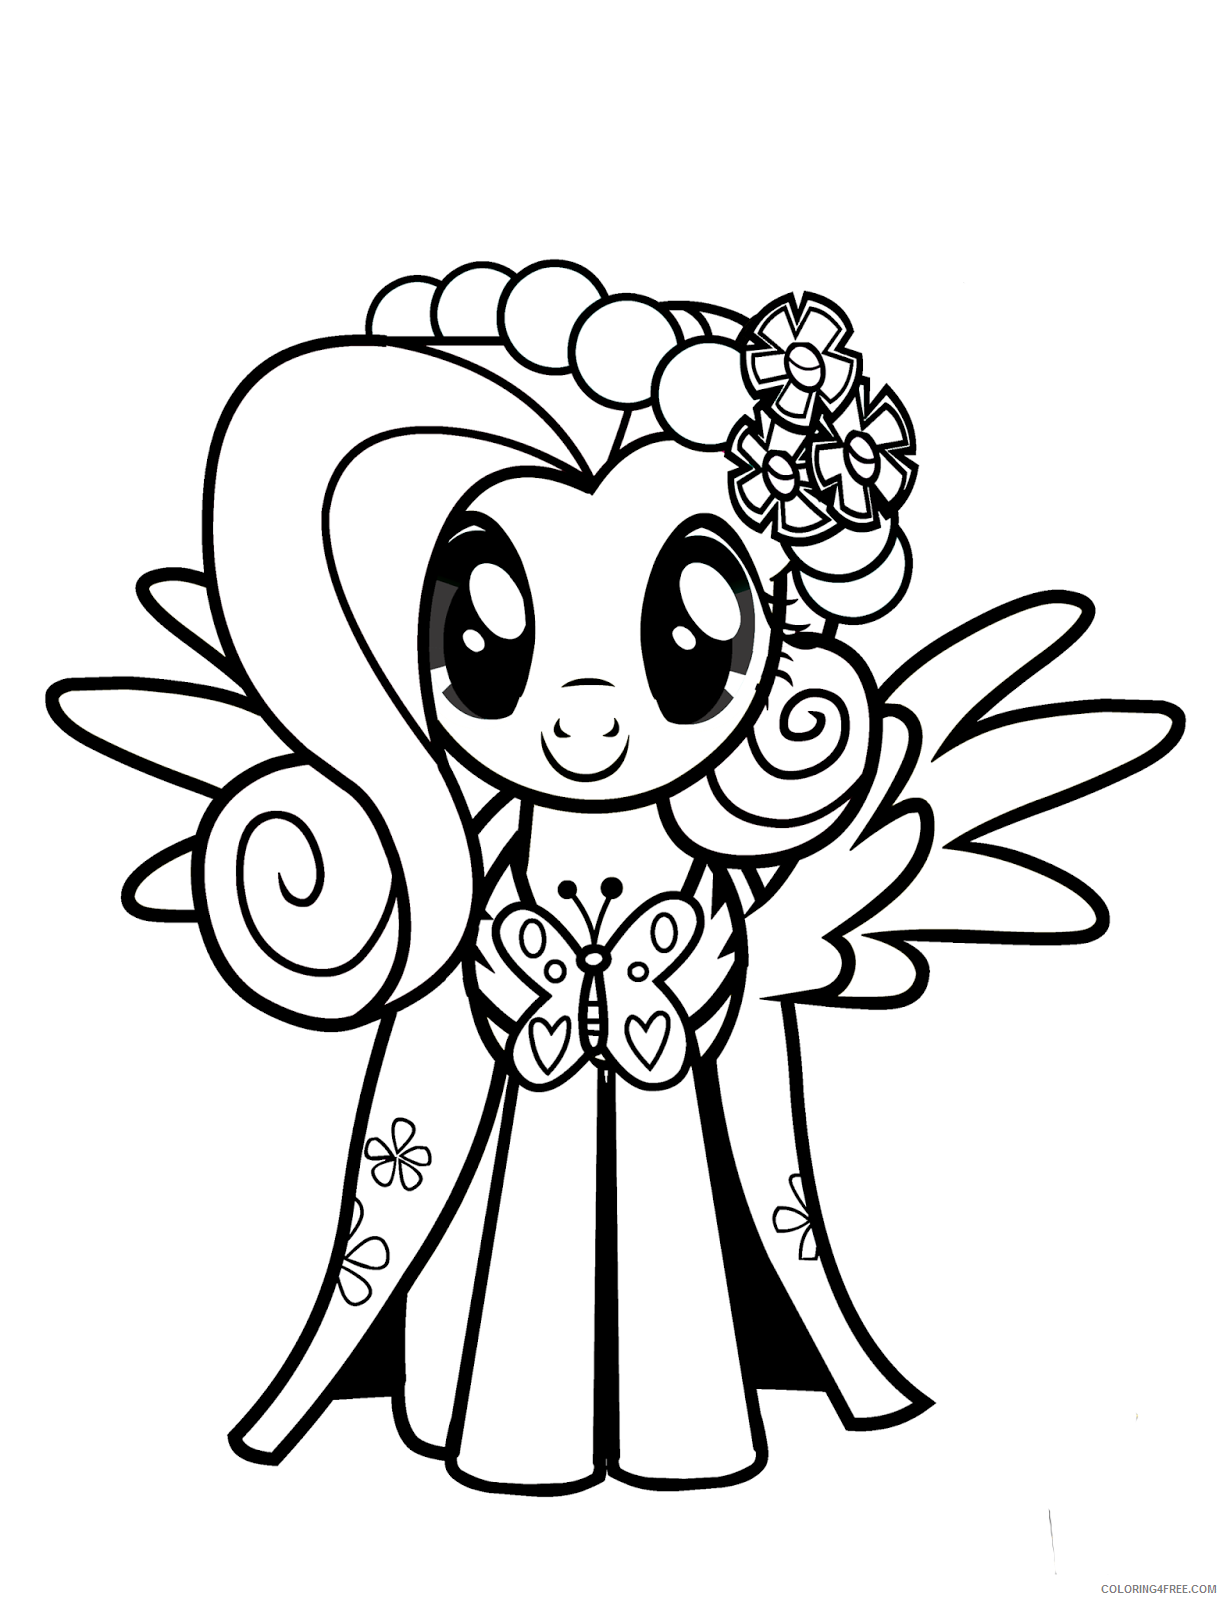 My Little Pony Coloring Pages Cartoons My Little Pony Fluttershy Printable 2020 4560 Coloring4free